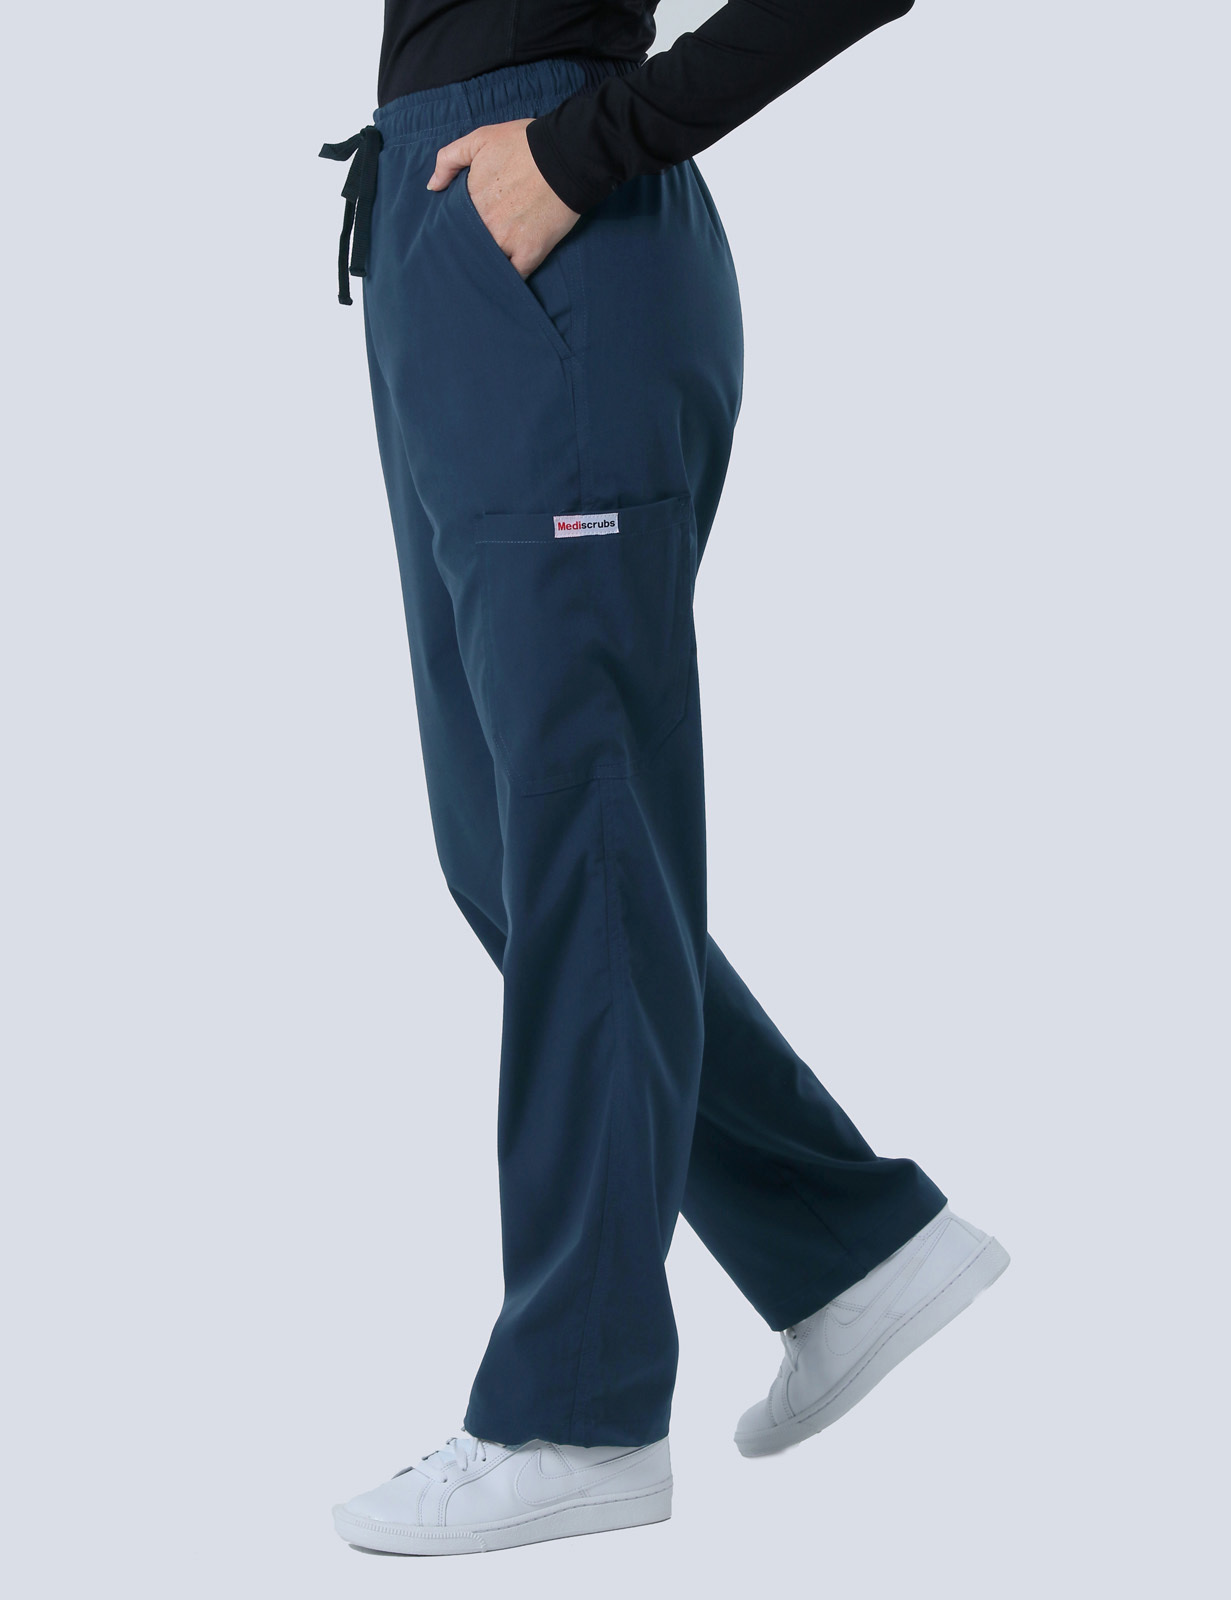 The Alfred Hospital - Emergency & Trauma Centre Doctor (4 Pocket Scrub Top and Cargo Pants in Navy incl Logos)